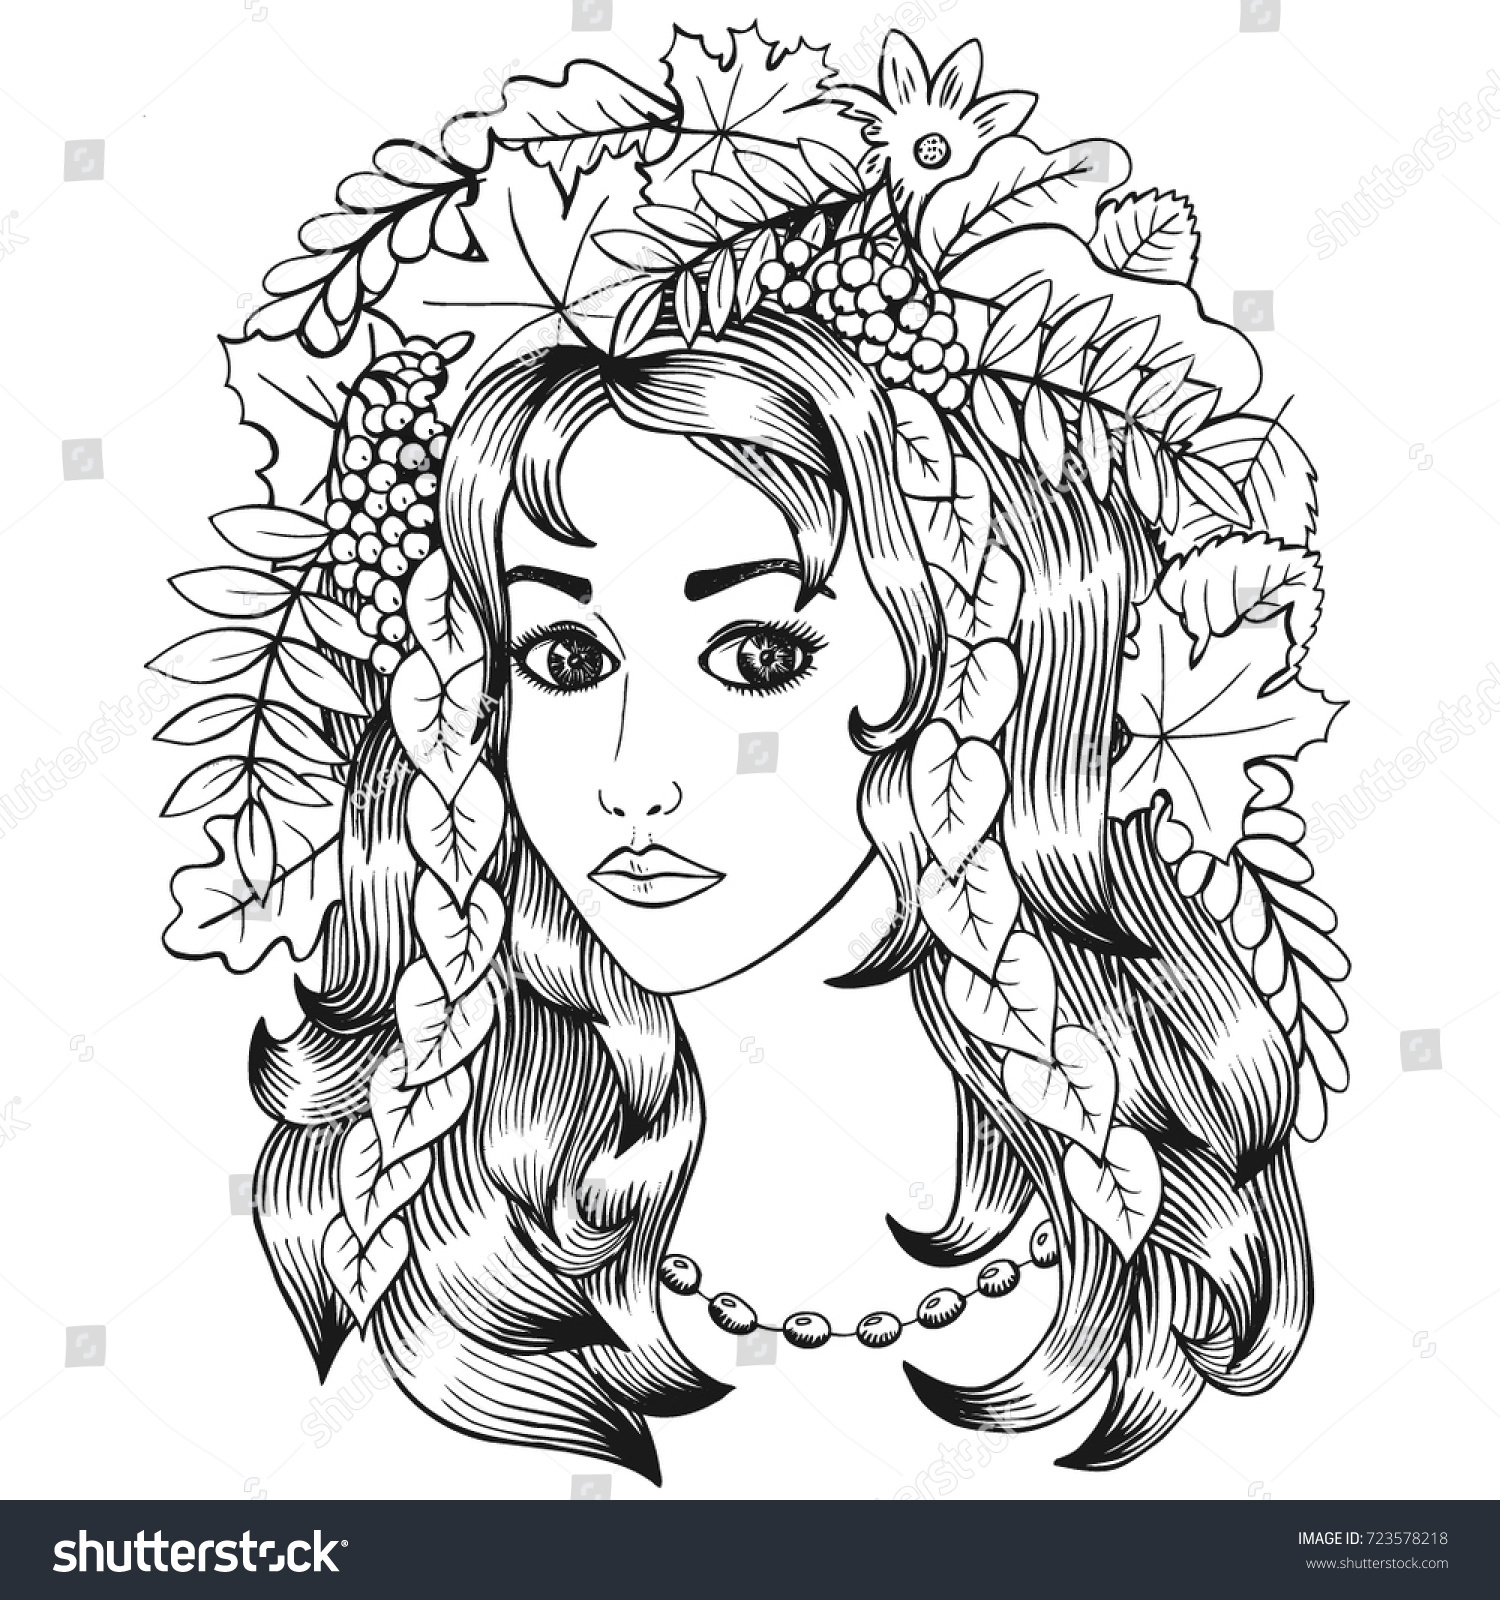 Beautiful Girl With Doodles Women's Tee Image by Shutterstock